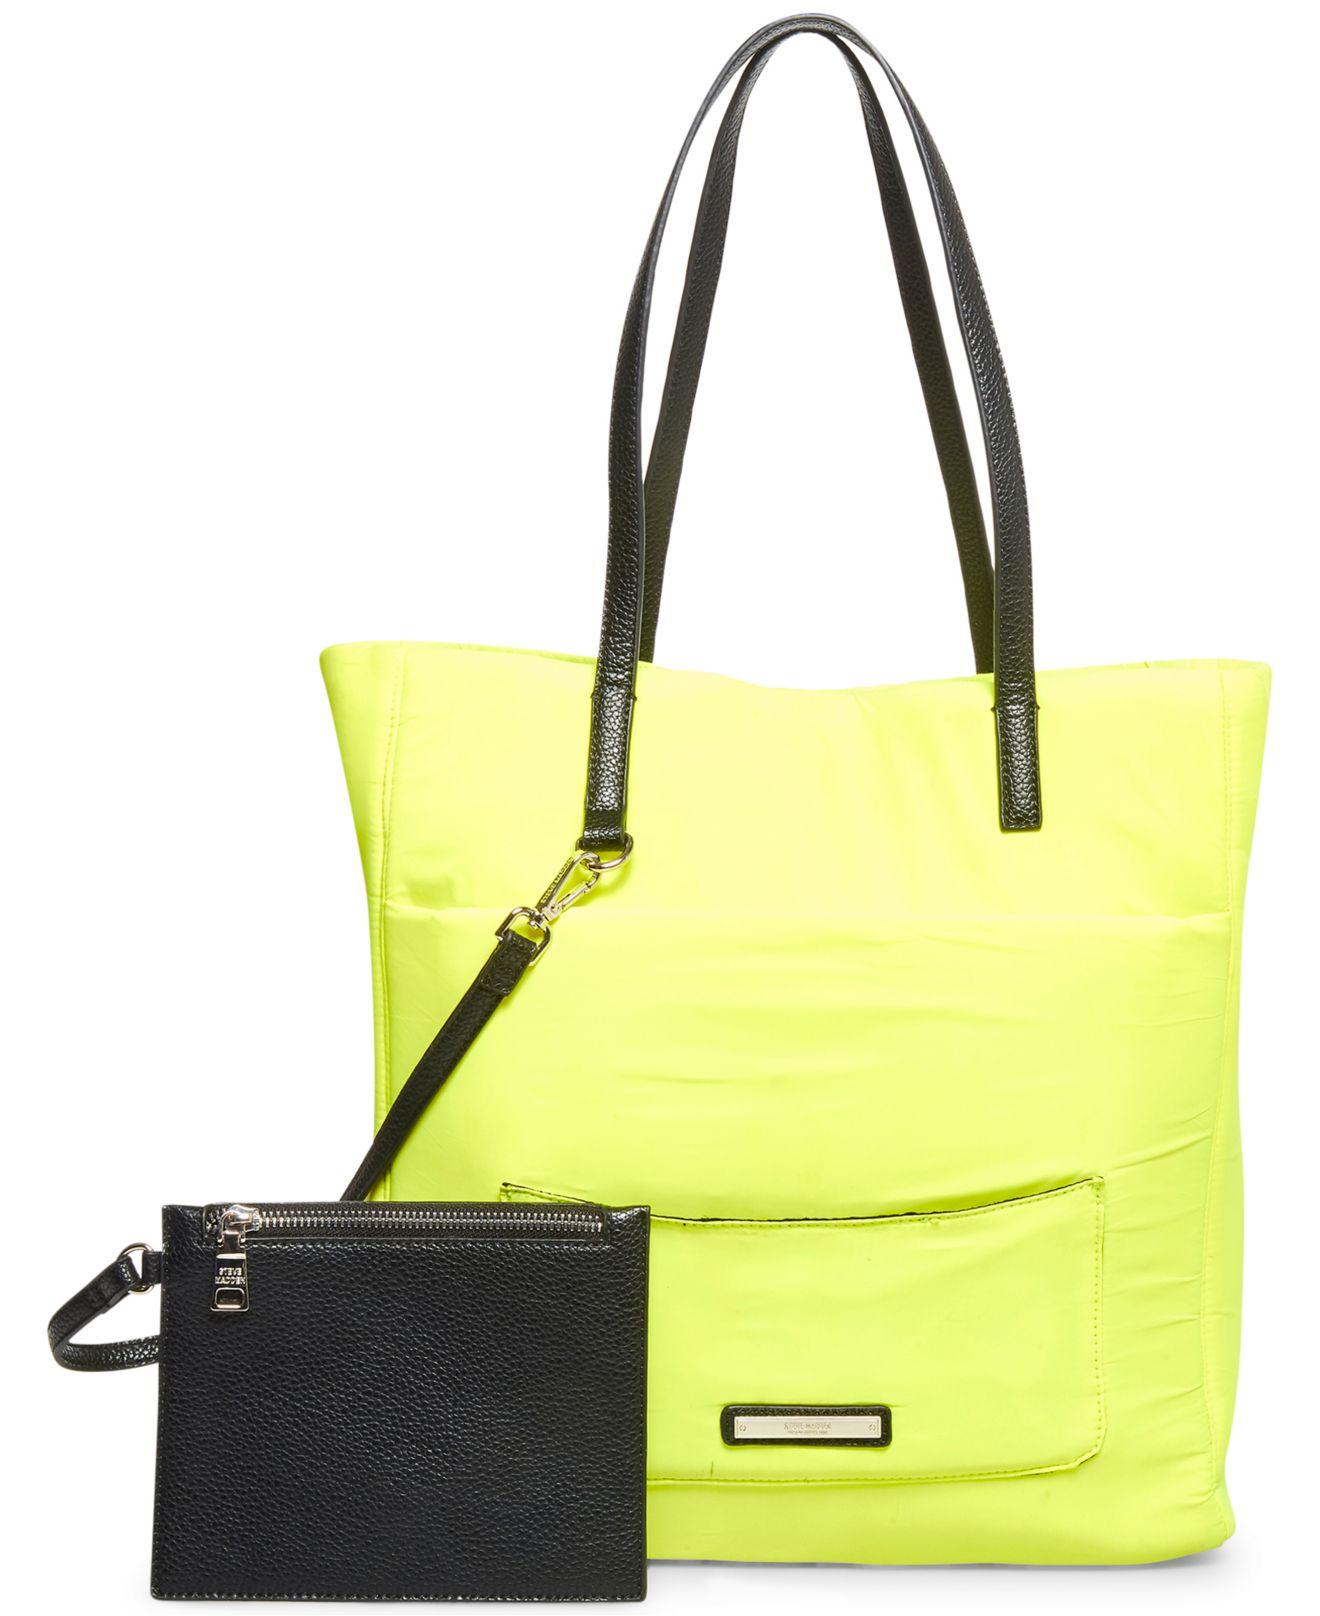 Steve Madden Synthetic Bhailey Tote in Yellow | Lyst